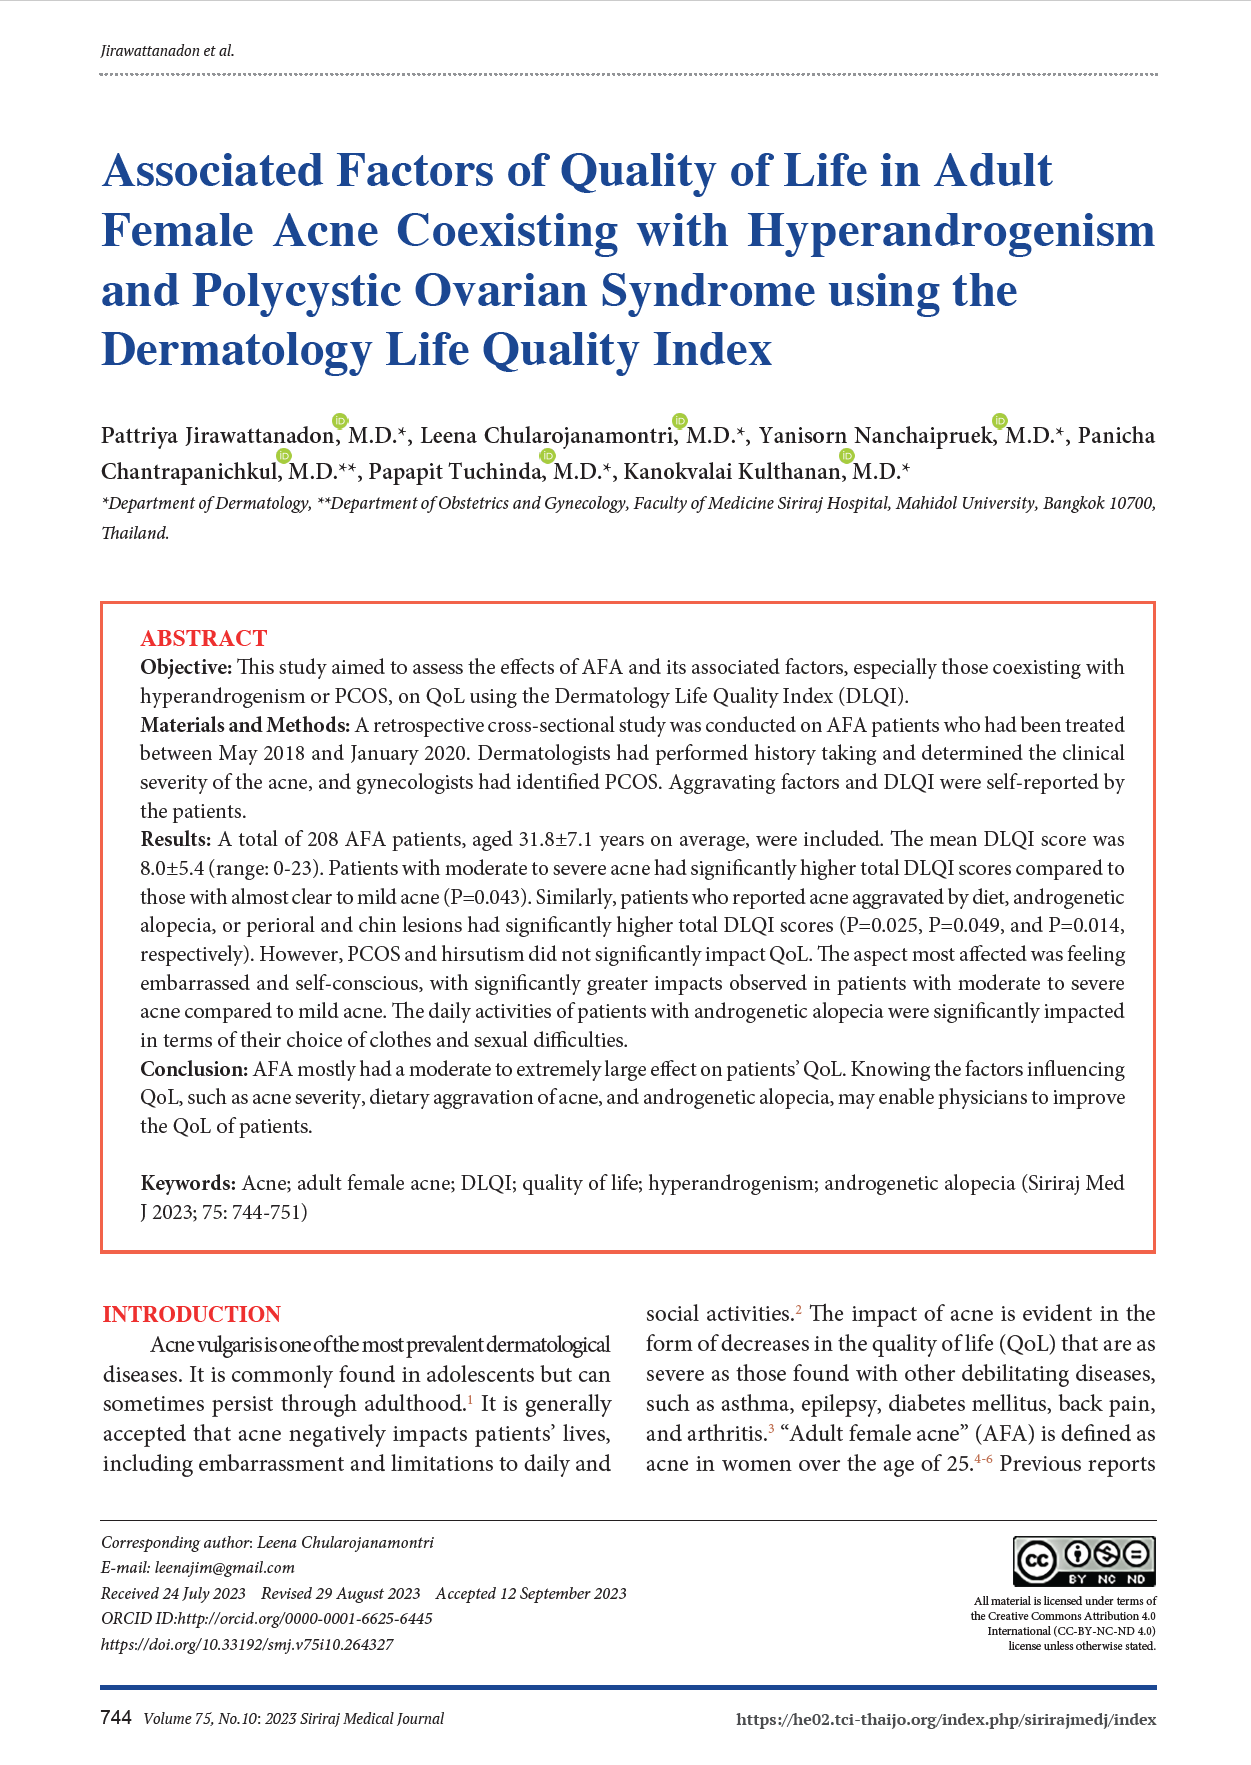 Associated Factors of Quality of Life in Adult Female Acne Coexisting with Hyperandrogenism and Polycystic Ovarian Syndrome